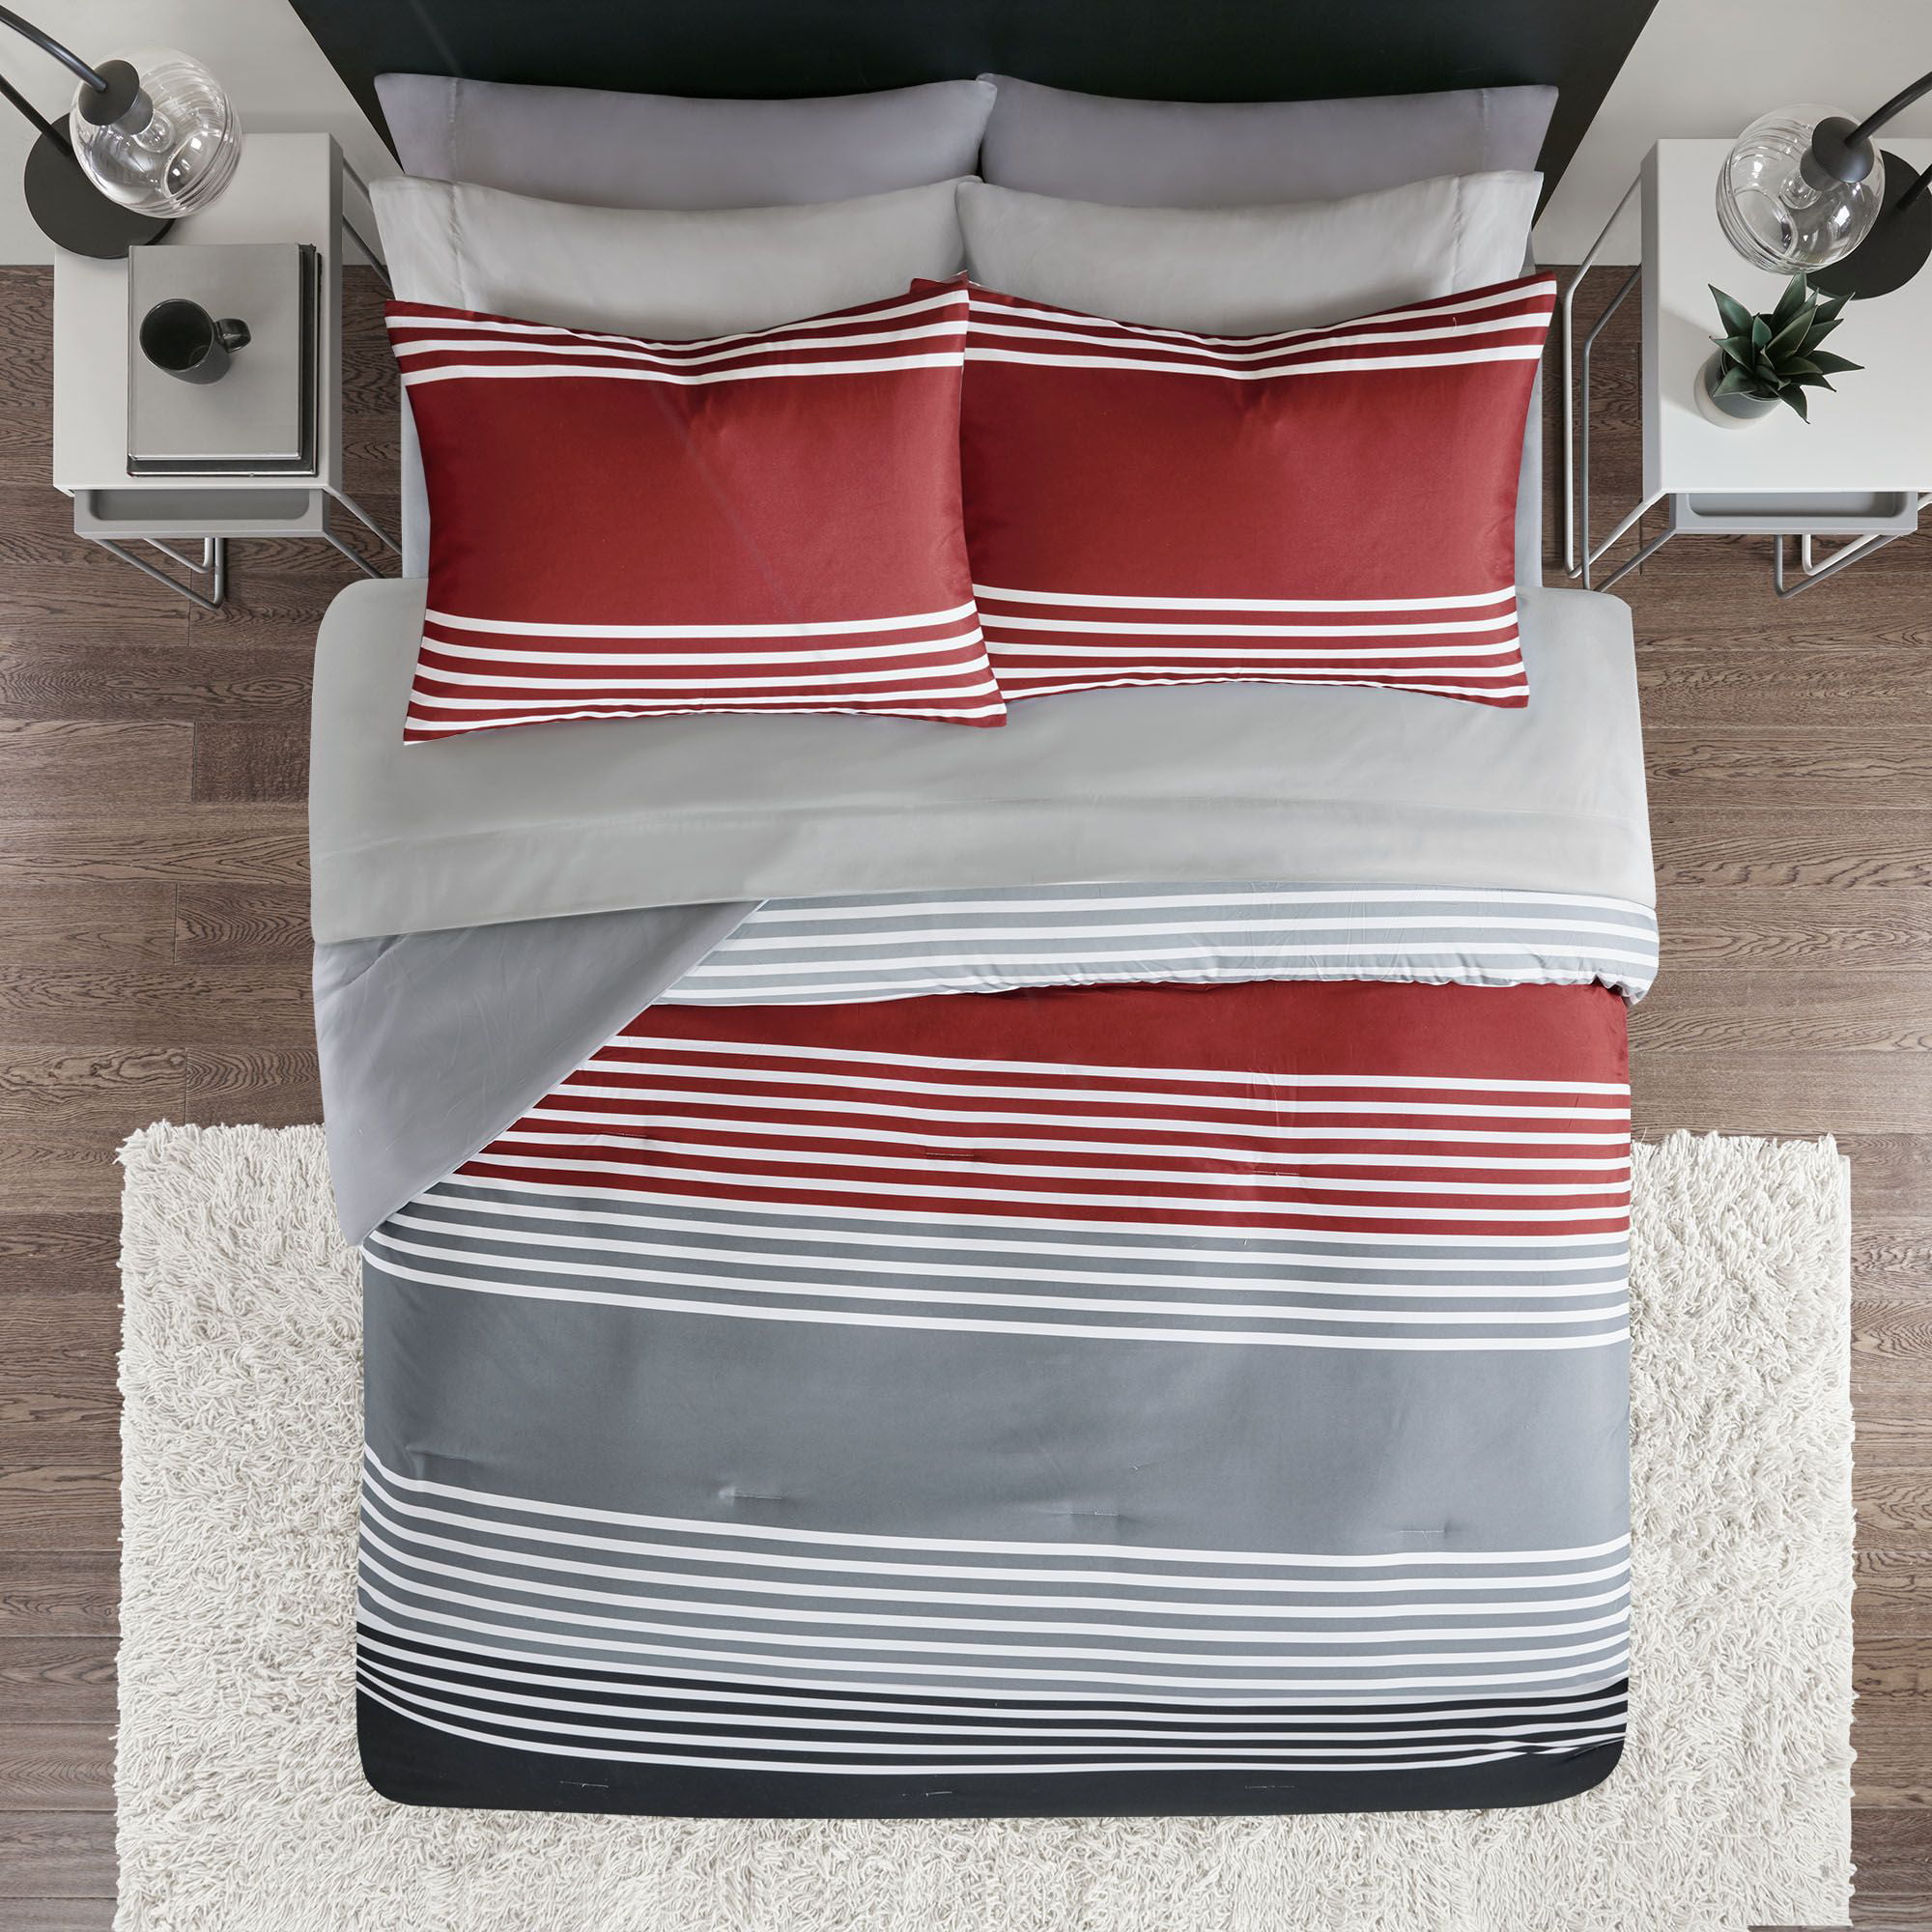 White Stripe Black Red Comfort Spaces Queen Comforter and Sheet Set 9pc Gray 